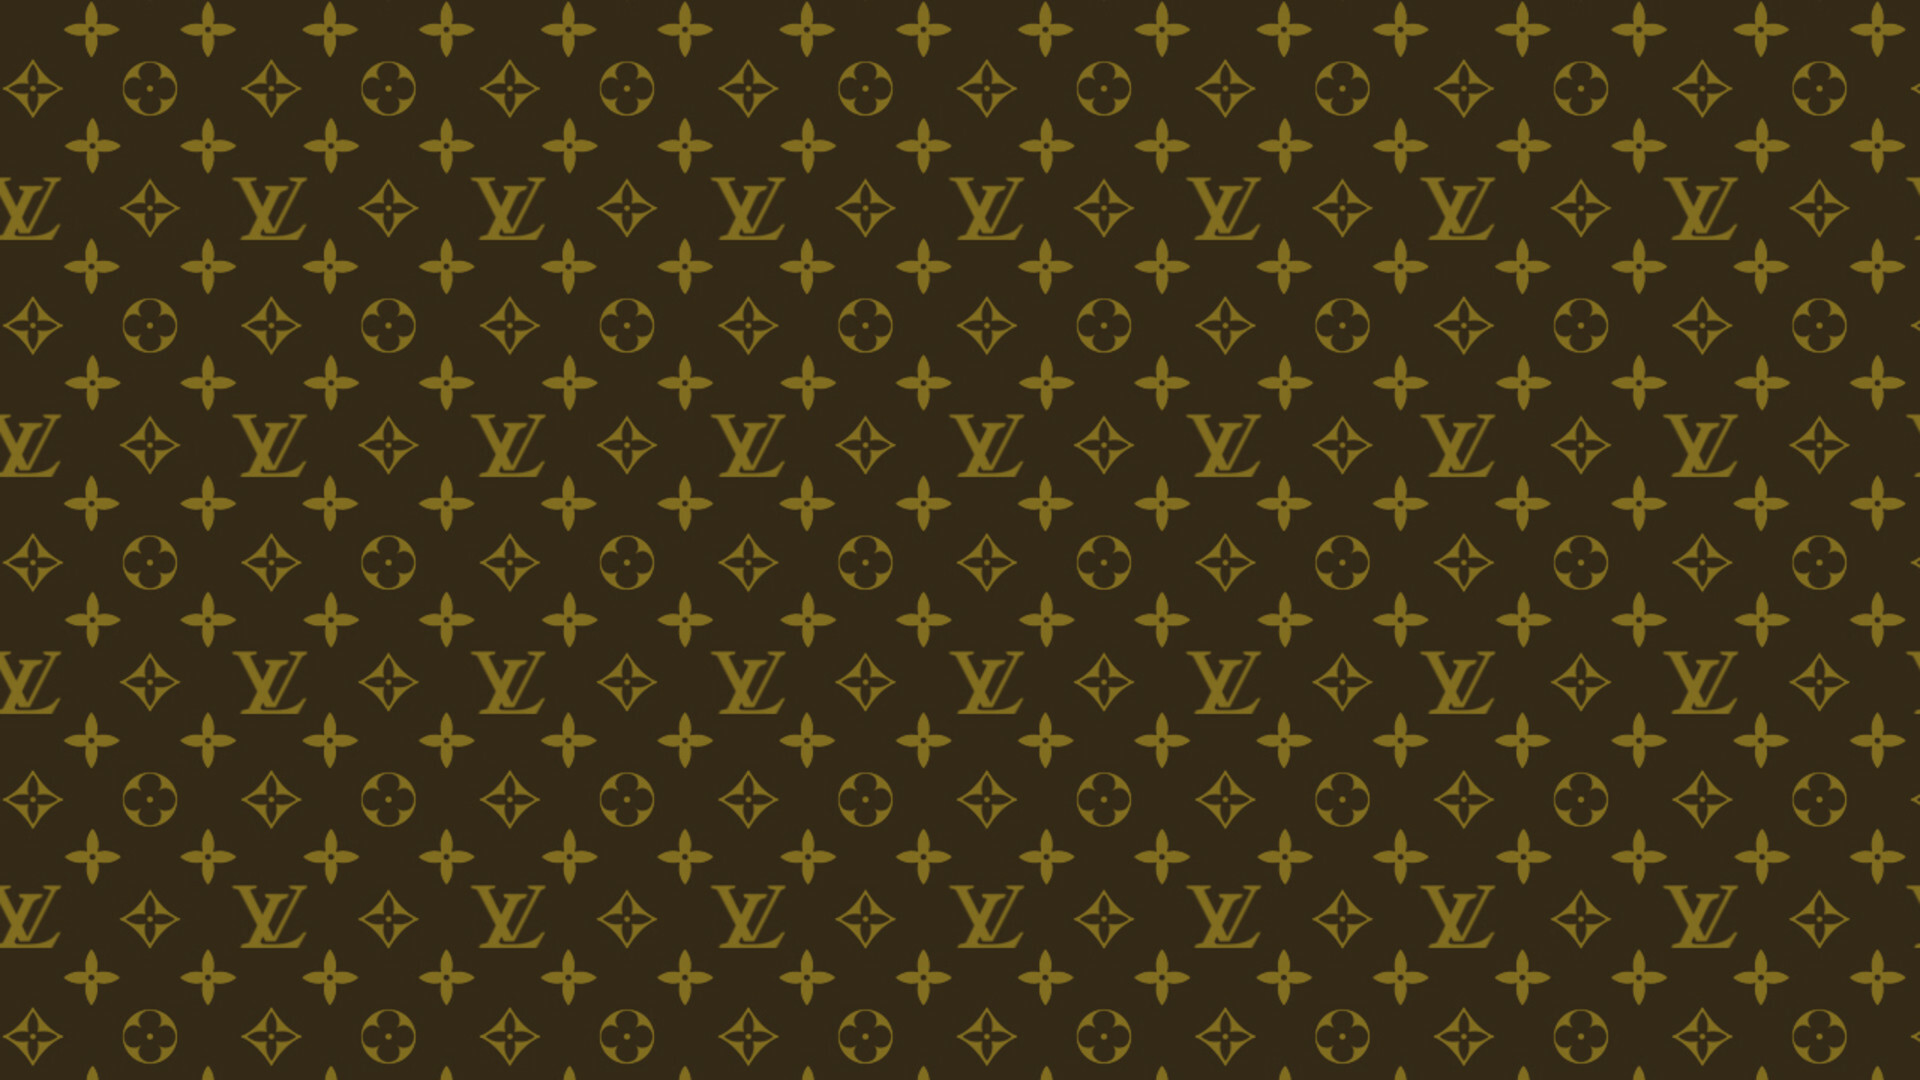 Louis Vuitton: The stores in Moscow, Russia, and in New Delhi, India were opened in 2003. 1920x1080 Full HD Wallpaper.